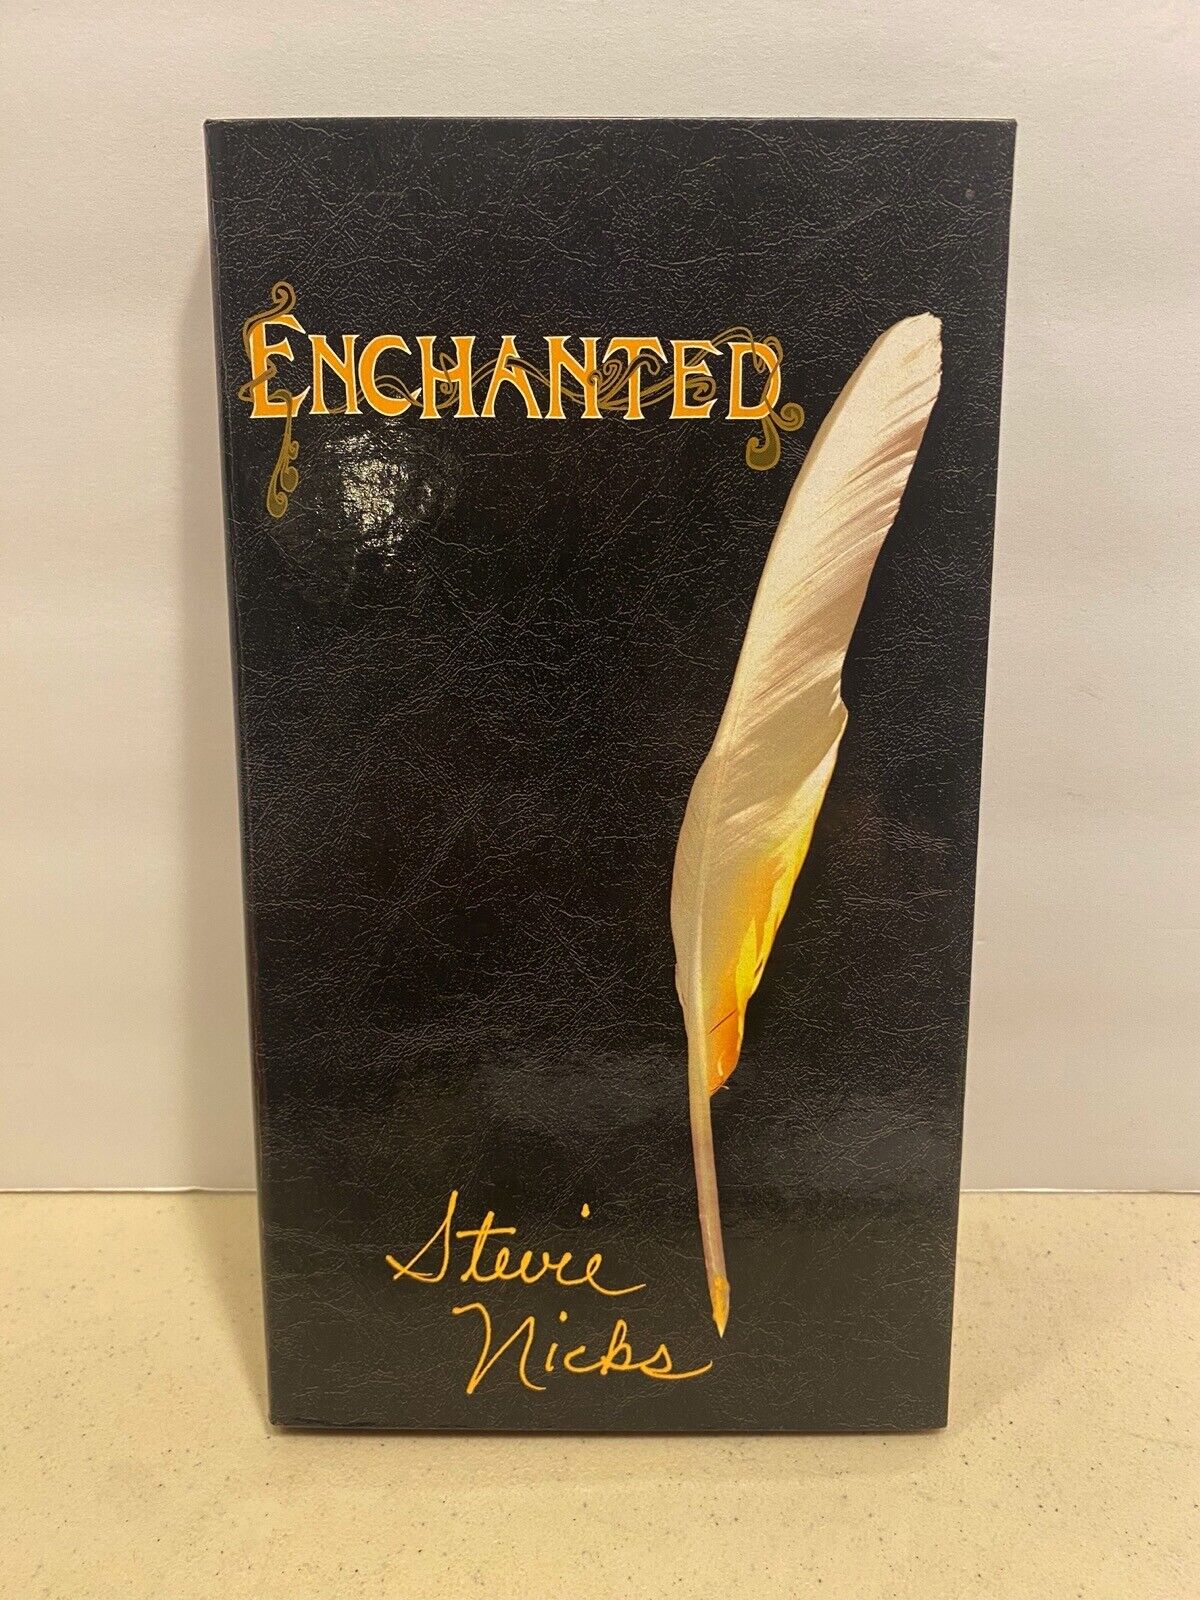 The Enchanted Works of Stevie Nicks 3 CD Box Set Complete with Book 1998 OOP